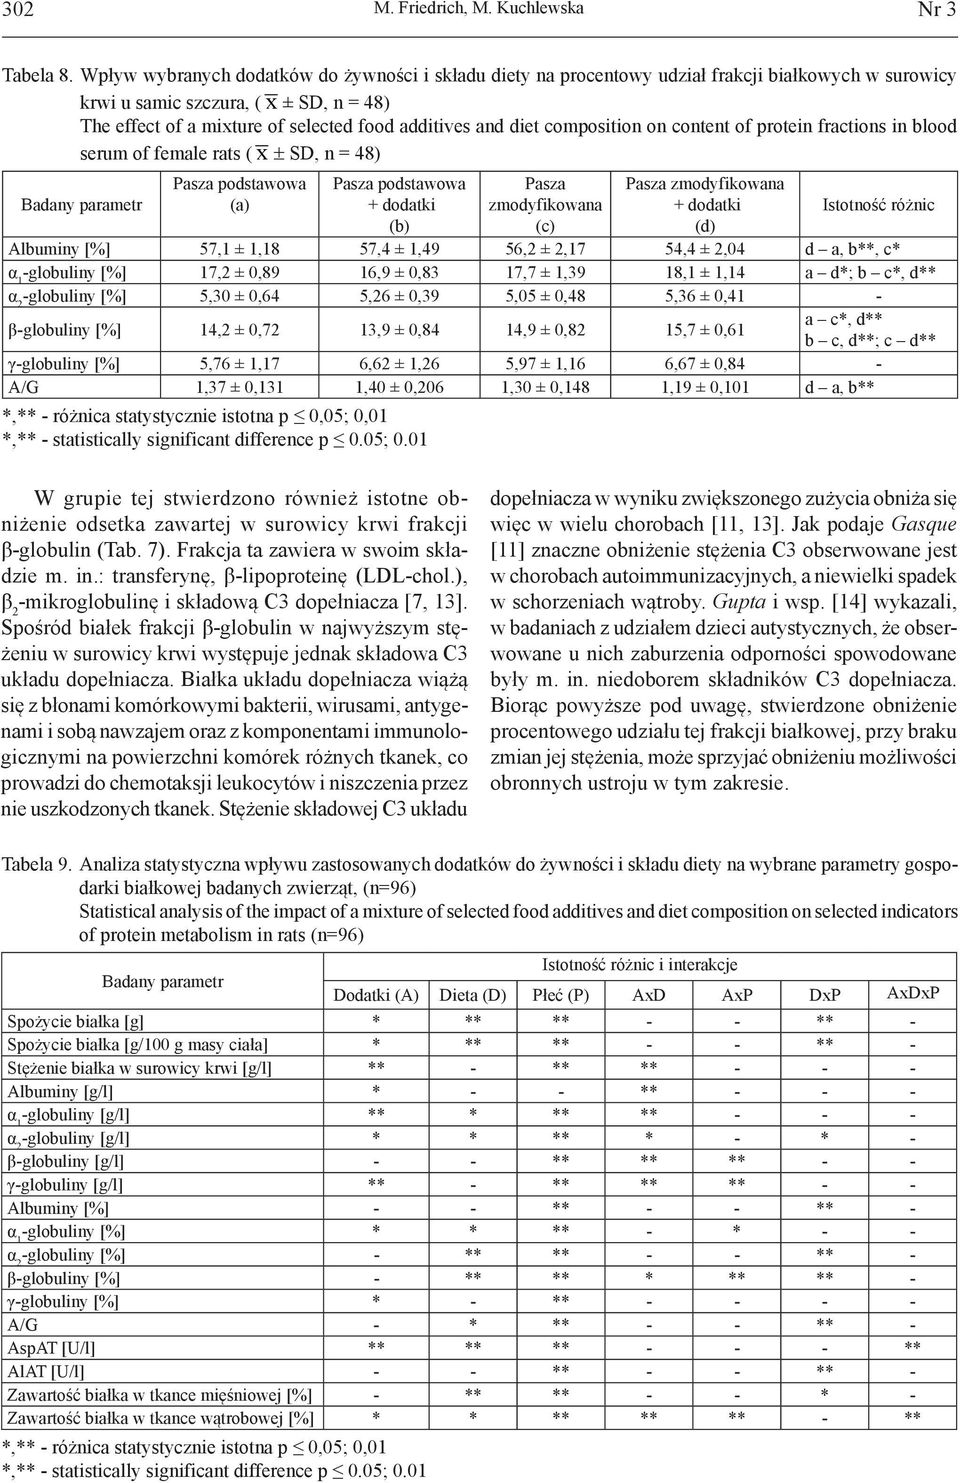 diet composition on content of protein fractions in blood serum of female rats ( x ± SD, n = 48) podstawowa (a) podstawowa (b) (c) (d) Istotność różnic Albuminy [%] 57,1 ± 1,18 57,4 ± 1,49 56,2 ±